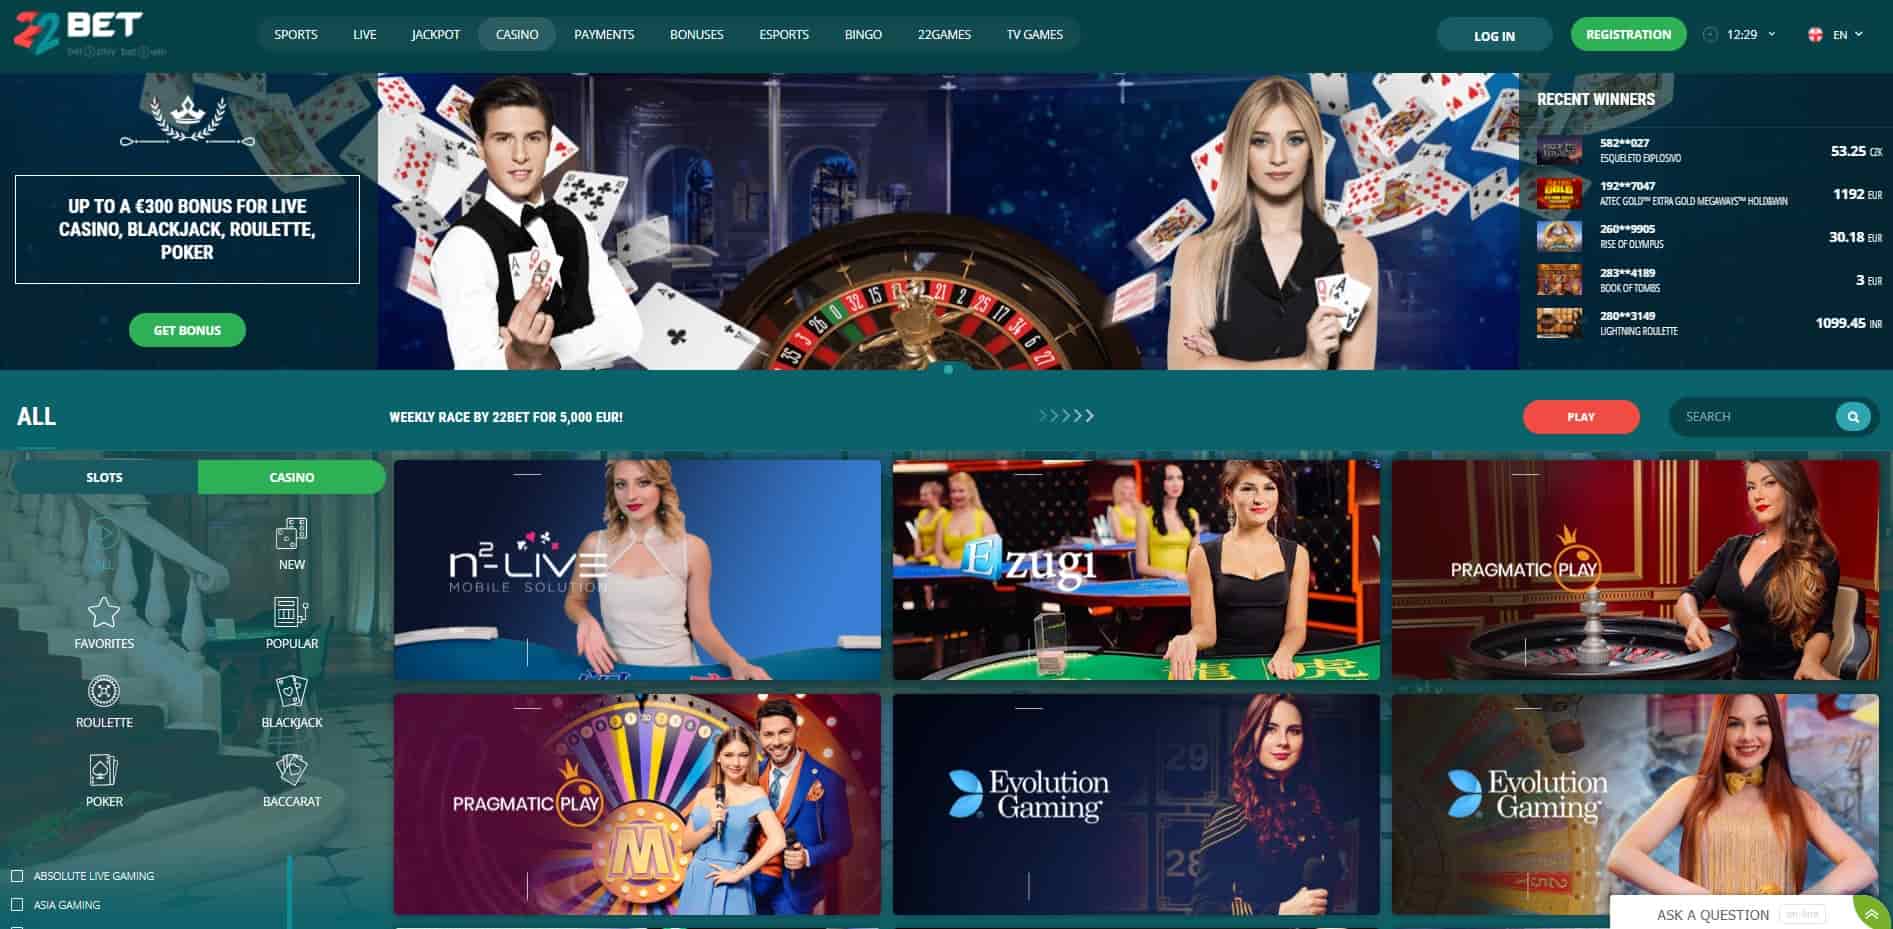 22bet - Best Live Casino Promotions in Indonesia